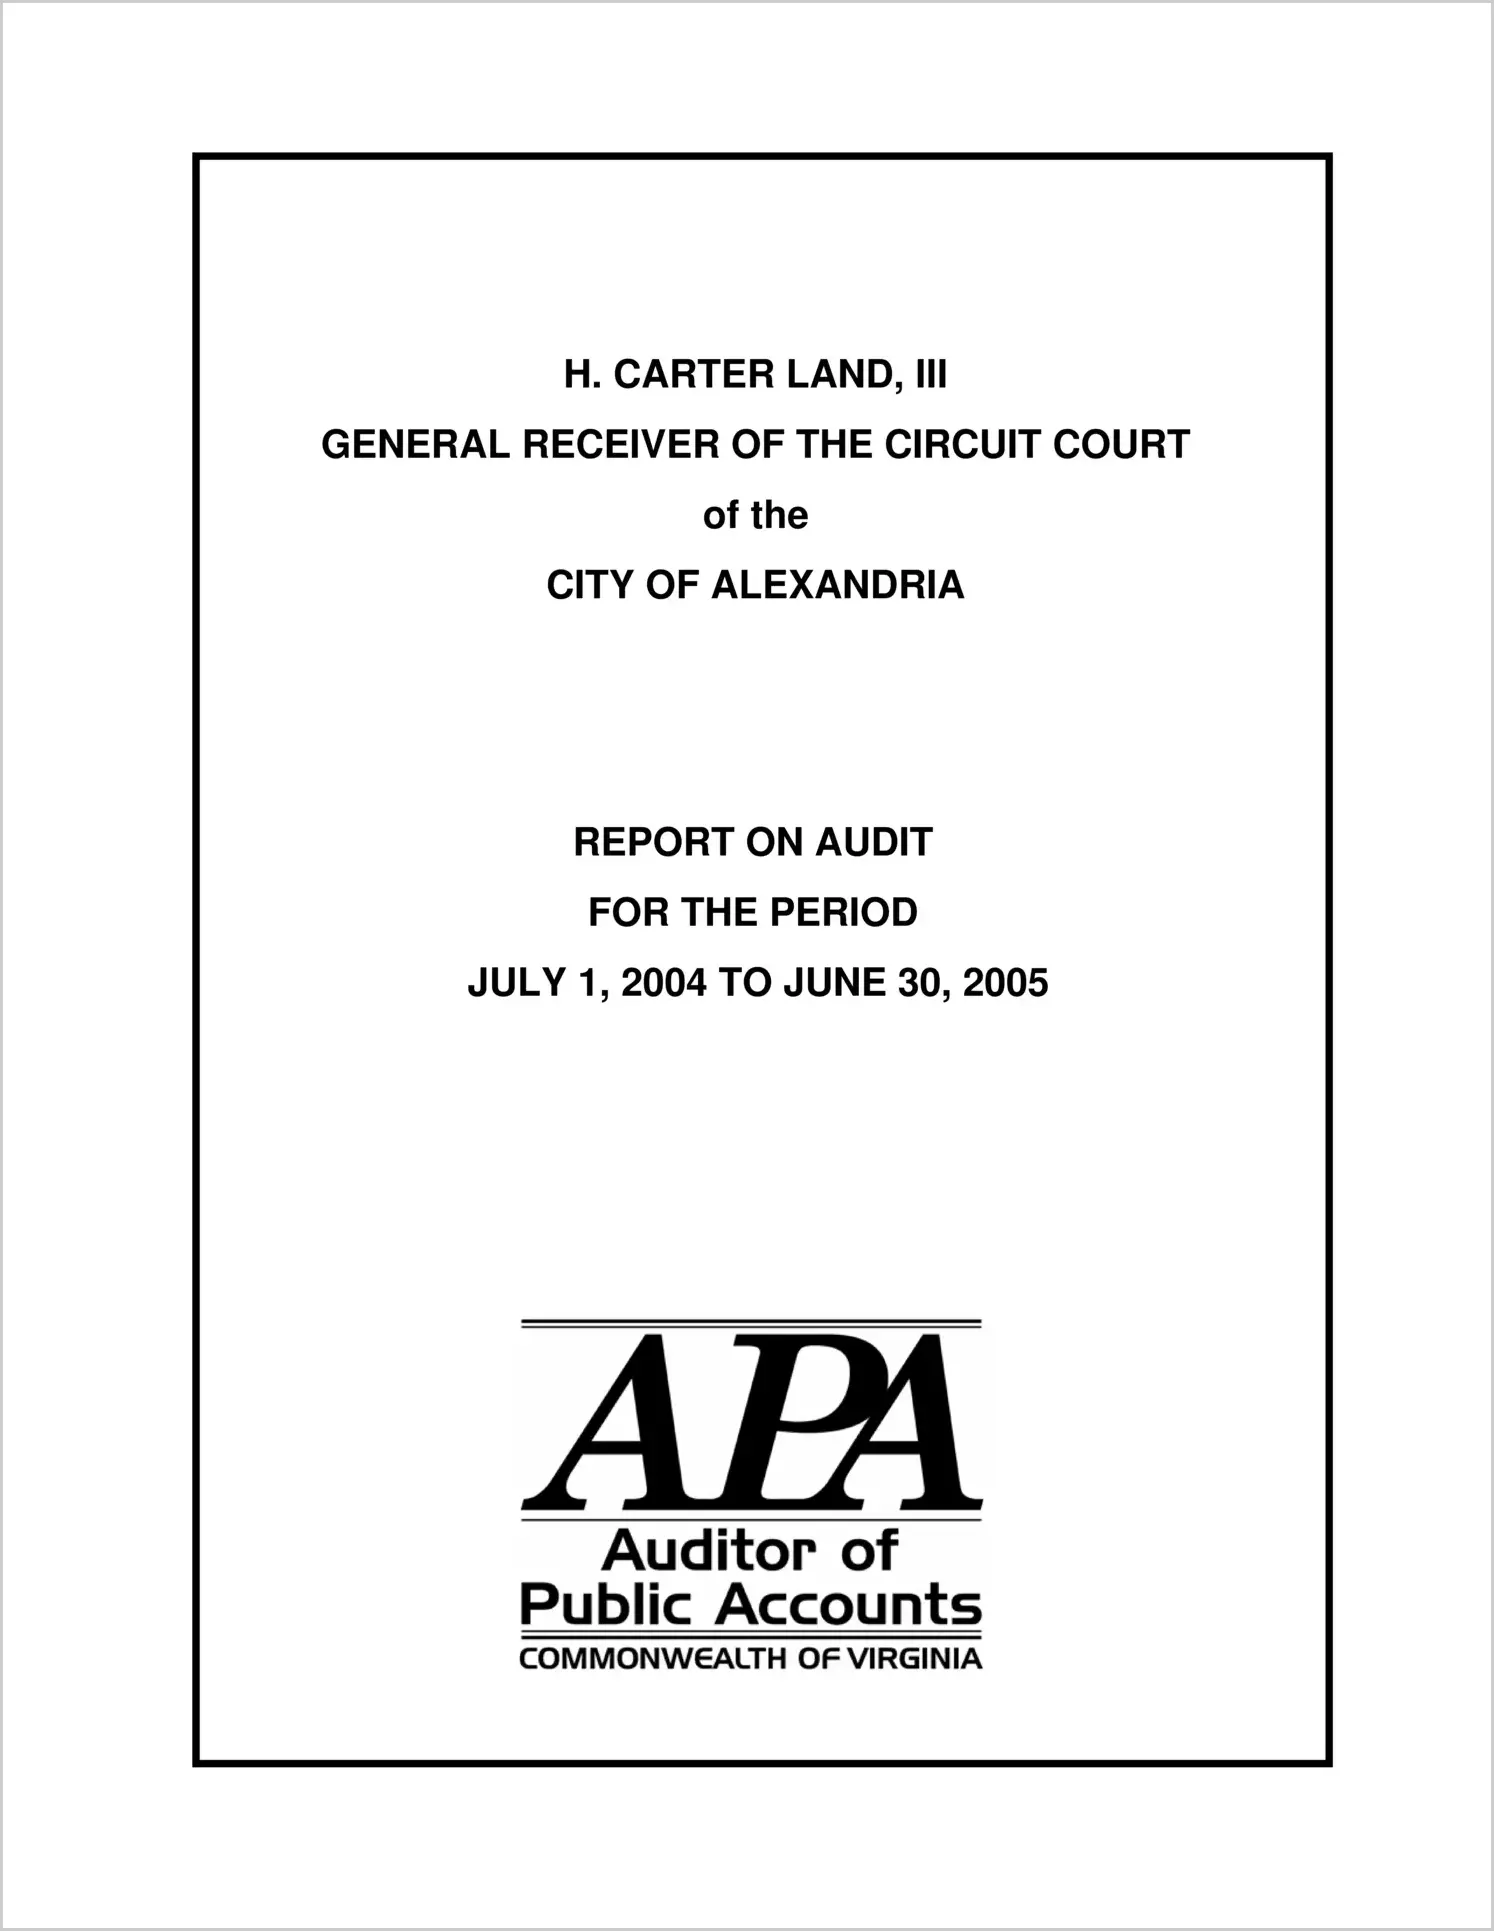 General Reciever of the Circuit Court of the City of Alexandria for the period July 1, 2004 to June 30, 2005